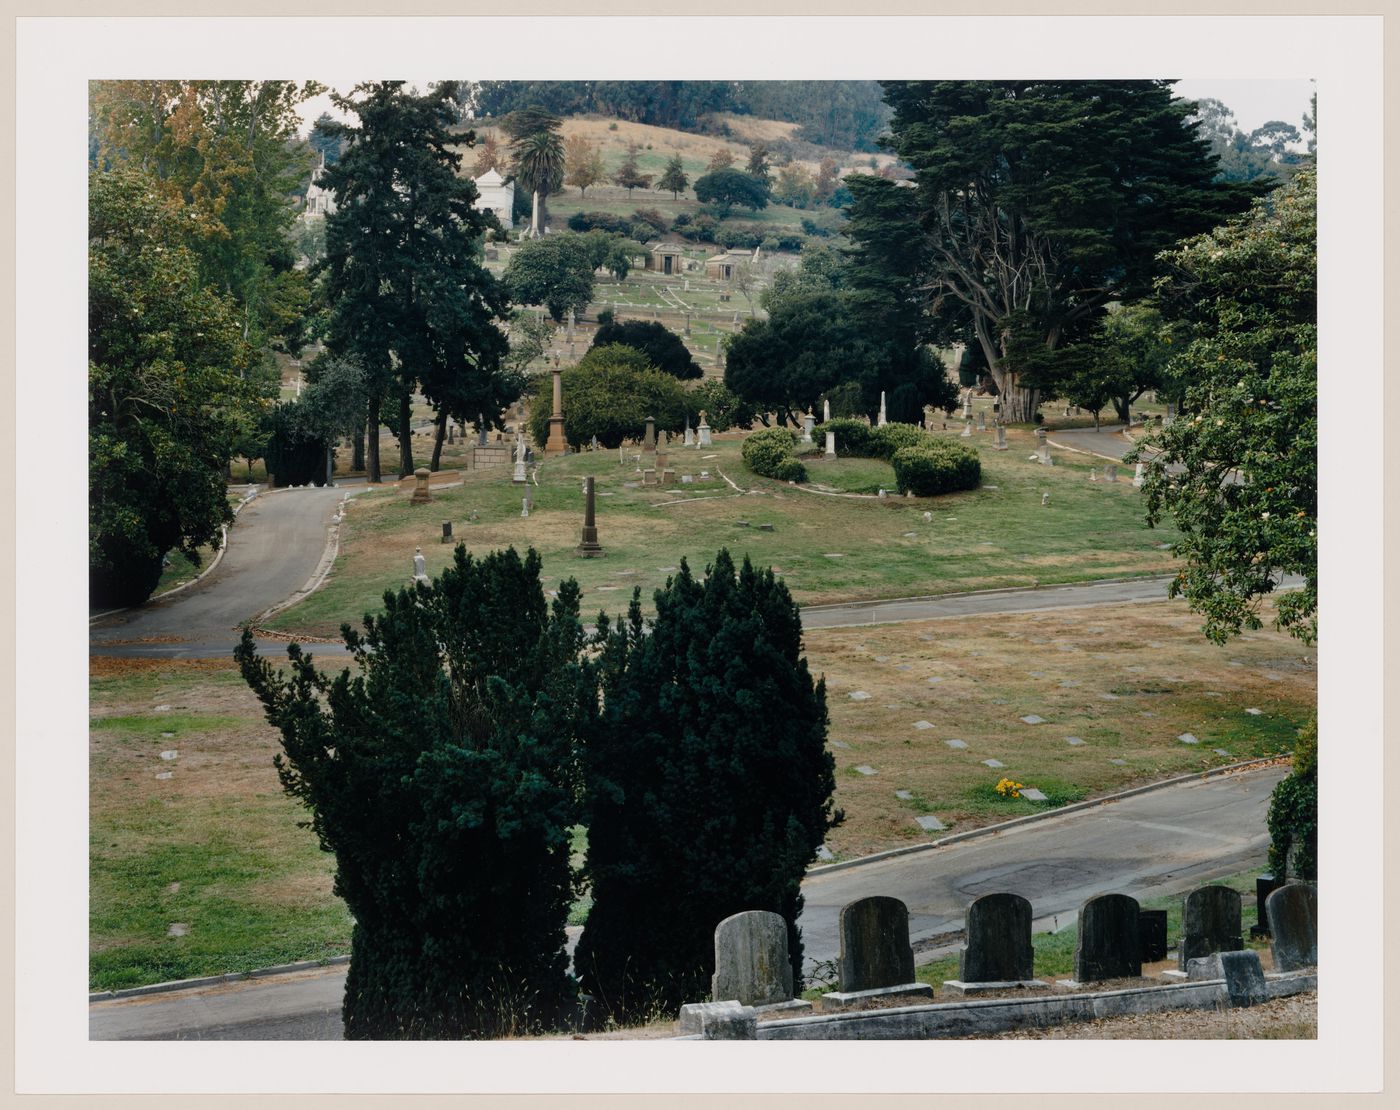 Viewing Olmsted: Overview, overcast day, Mountain View Cemetery, Oakland, California